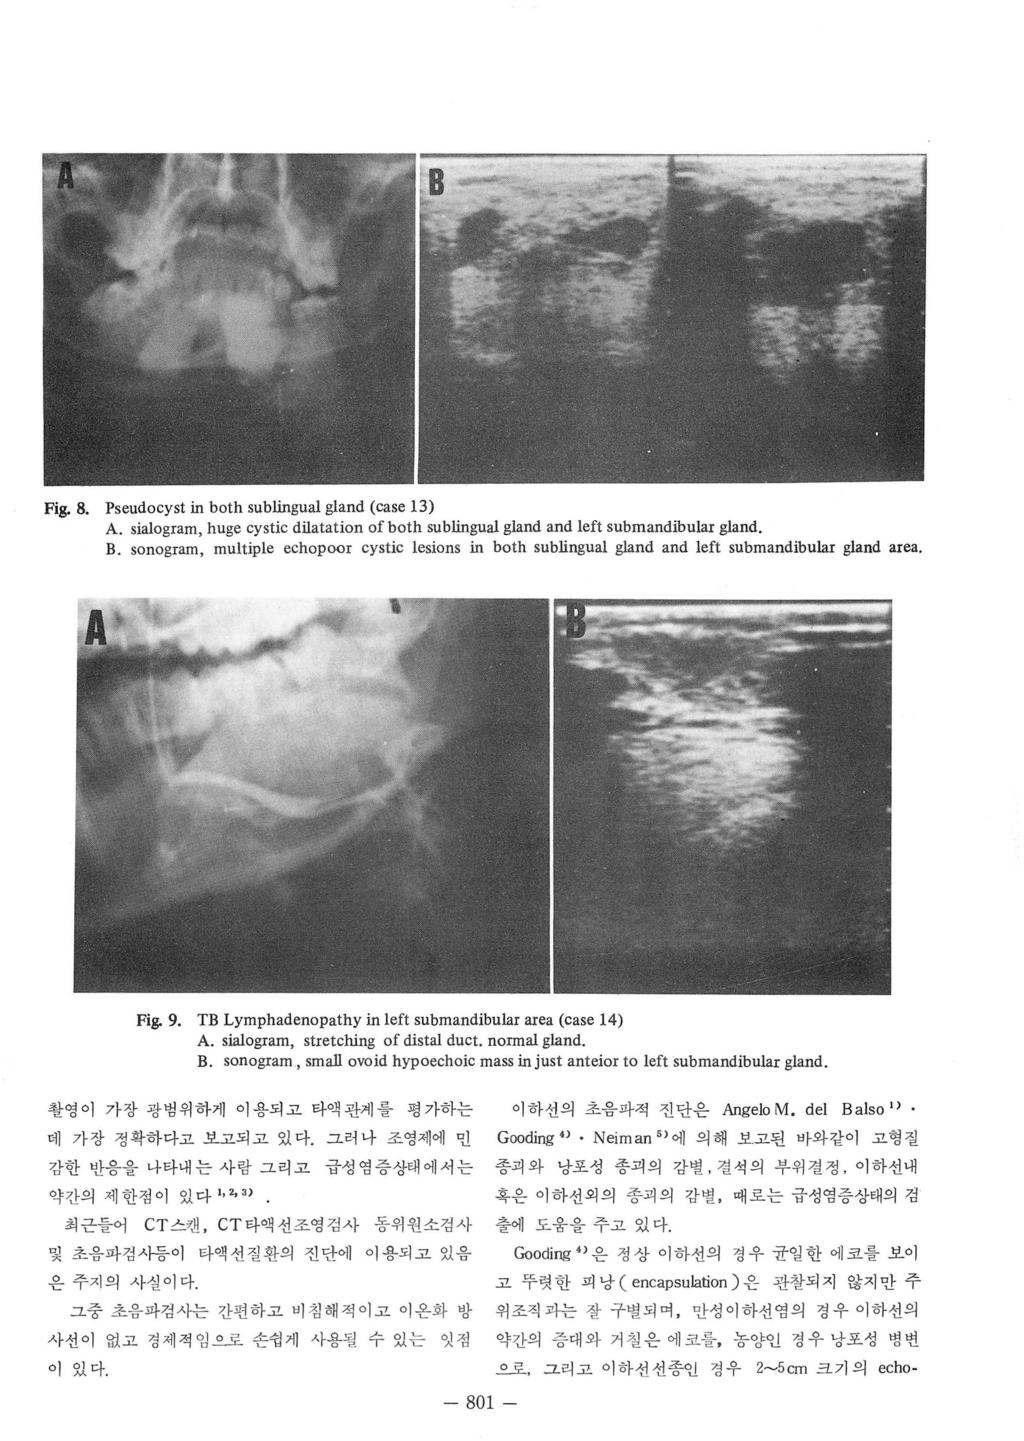 Fig. 8. Pseudocyst in both sublingual gland (case 3) A. sialogram, huge cystic dilatation ofboth sublingual gland and left submandibular 밍 and. B.